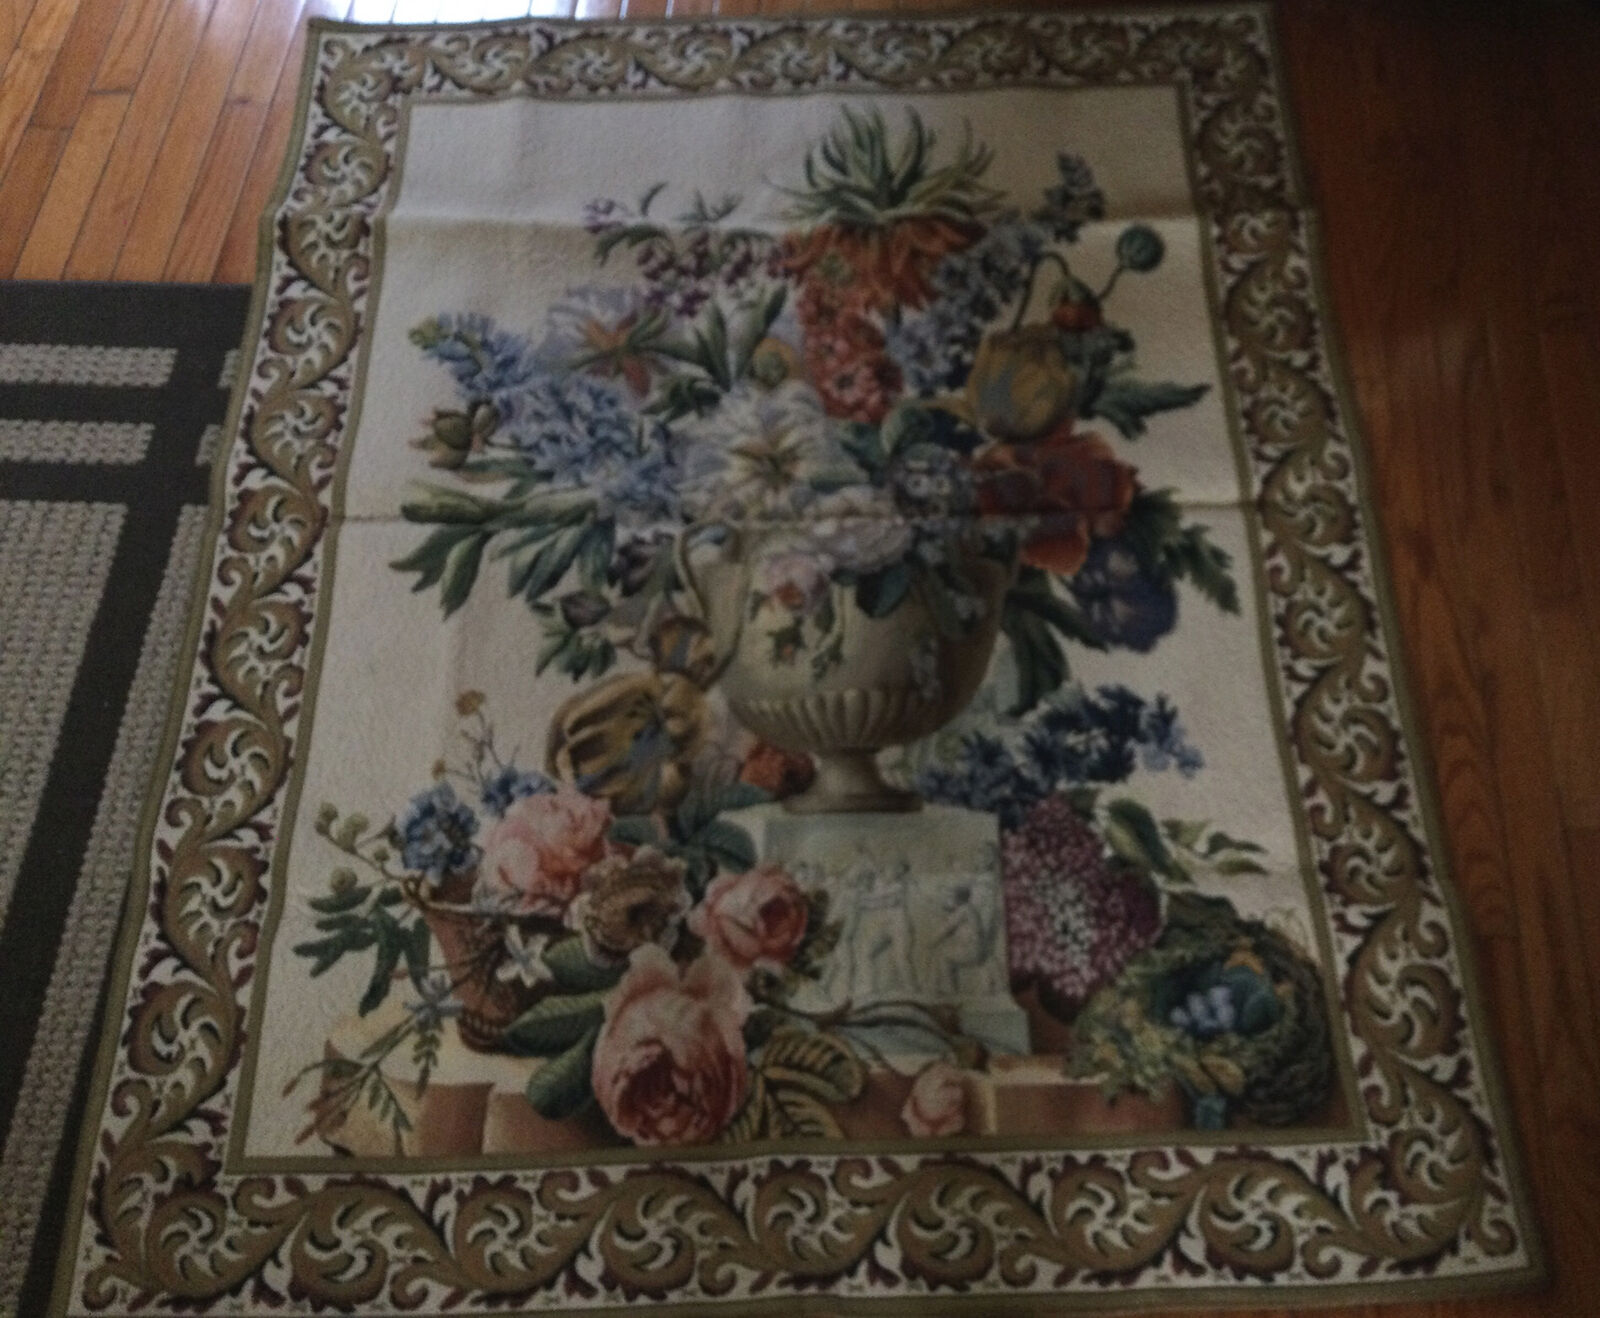 Corona Decor Co. Vintage Wall Flowers Tapestry 48” x 60”- Mint Condition W/Hooks